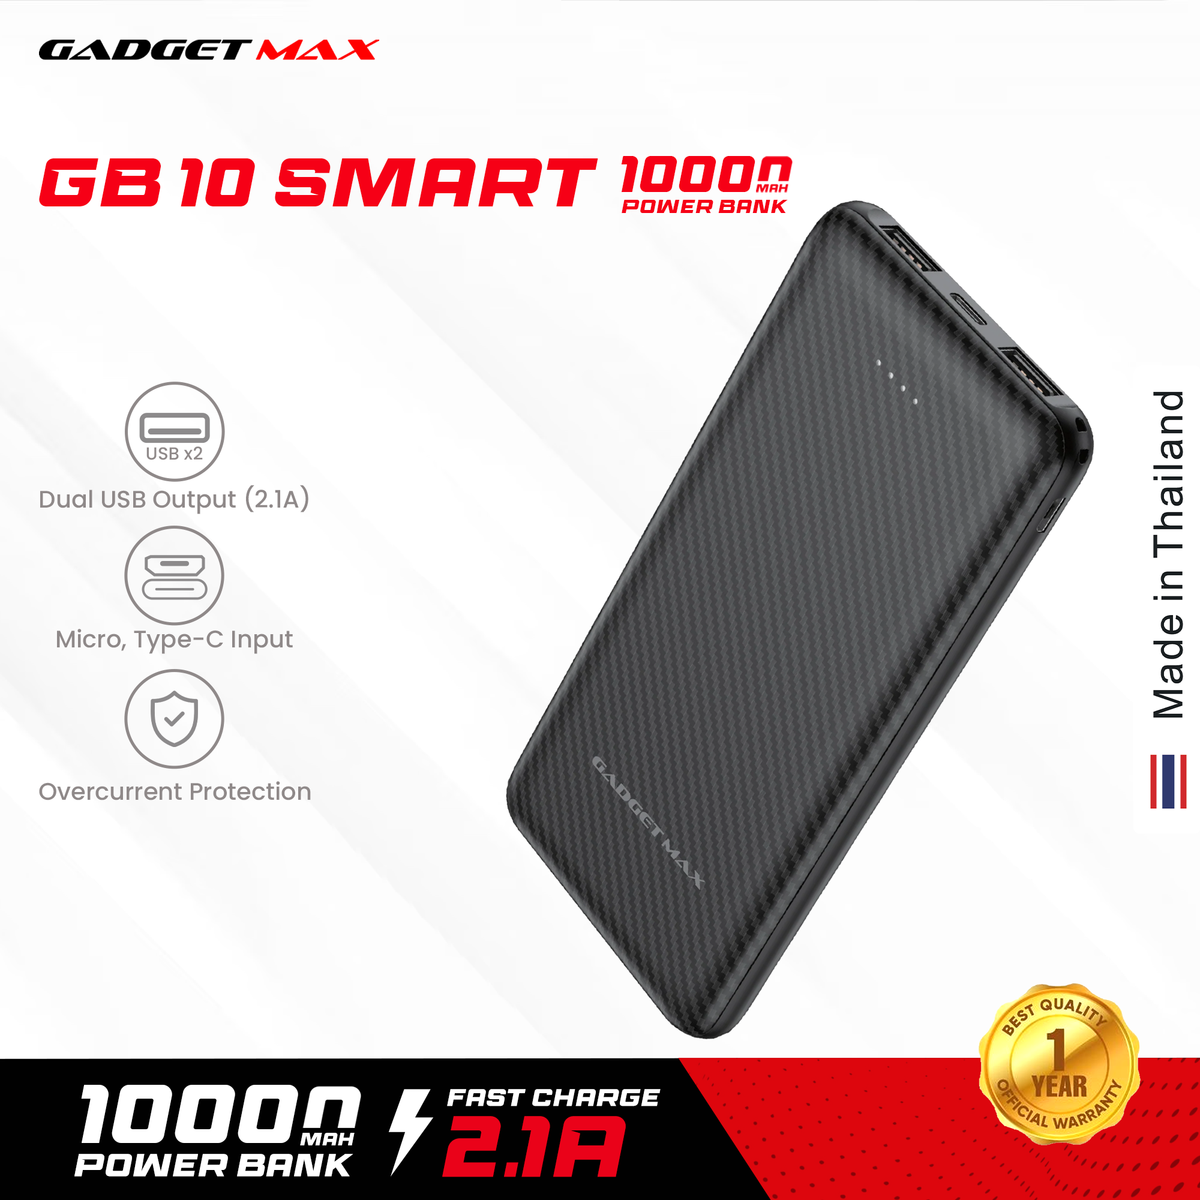 GADGET MAX GB10 10000mAh SMART 2.1A  POWER BANK (5V/2.1A)|(OUTPUT-2USB/INPUT-MICRO,TYPE-C), 10000 mAh Power Bank, Power Bank for All, Android Power Bank